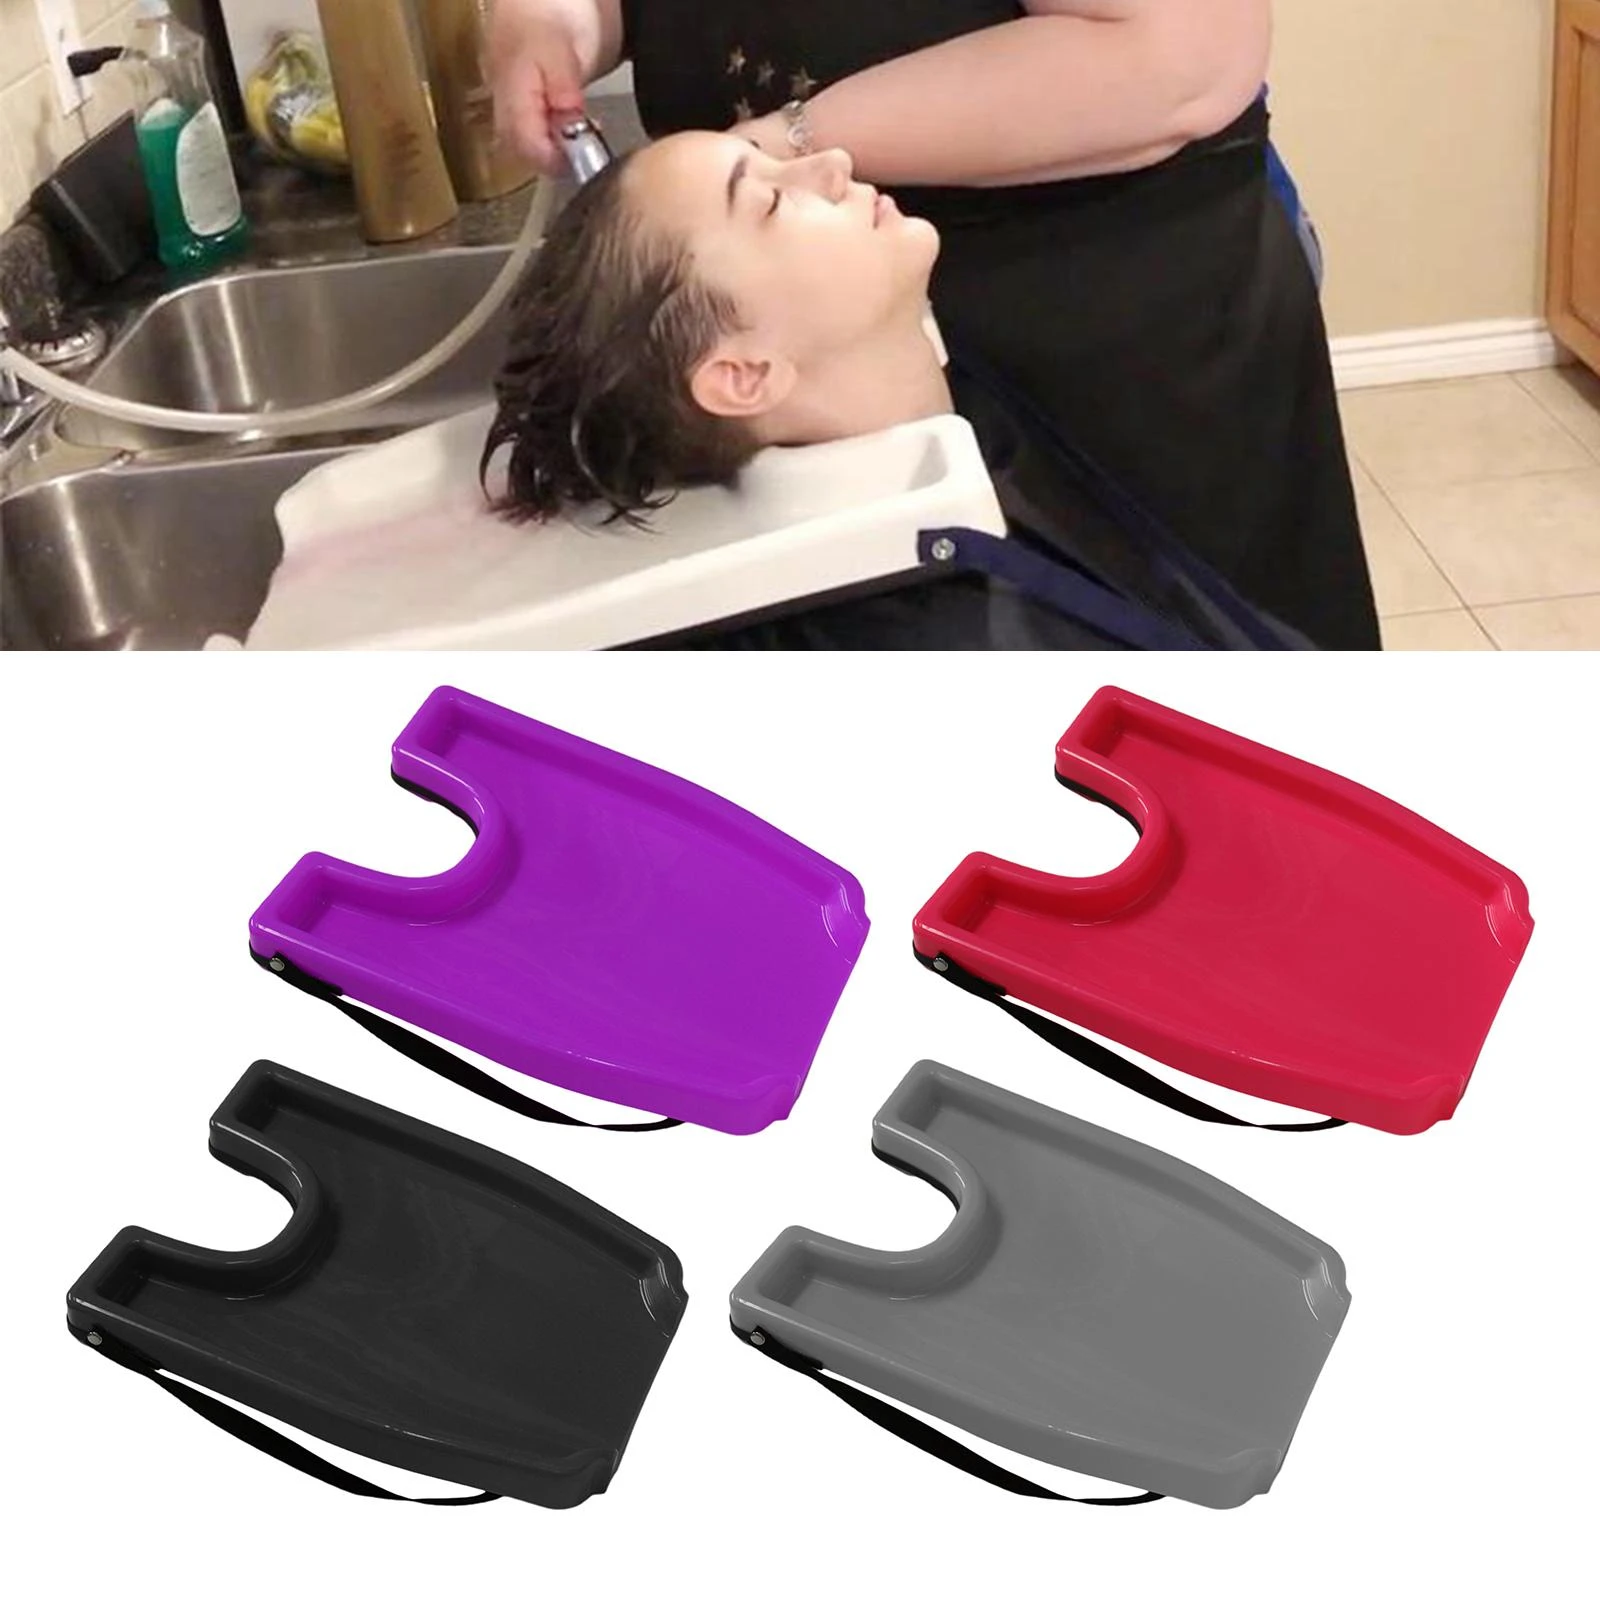 Portable Shampoo Tray Washing Bowl Hair Wash Sink Basin Neck Rest Salon  Home Medical Hairdressing Hair Care Tool Plastic|Styling Accessories| -  AliExpress